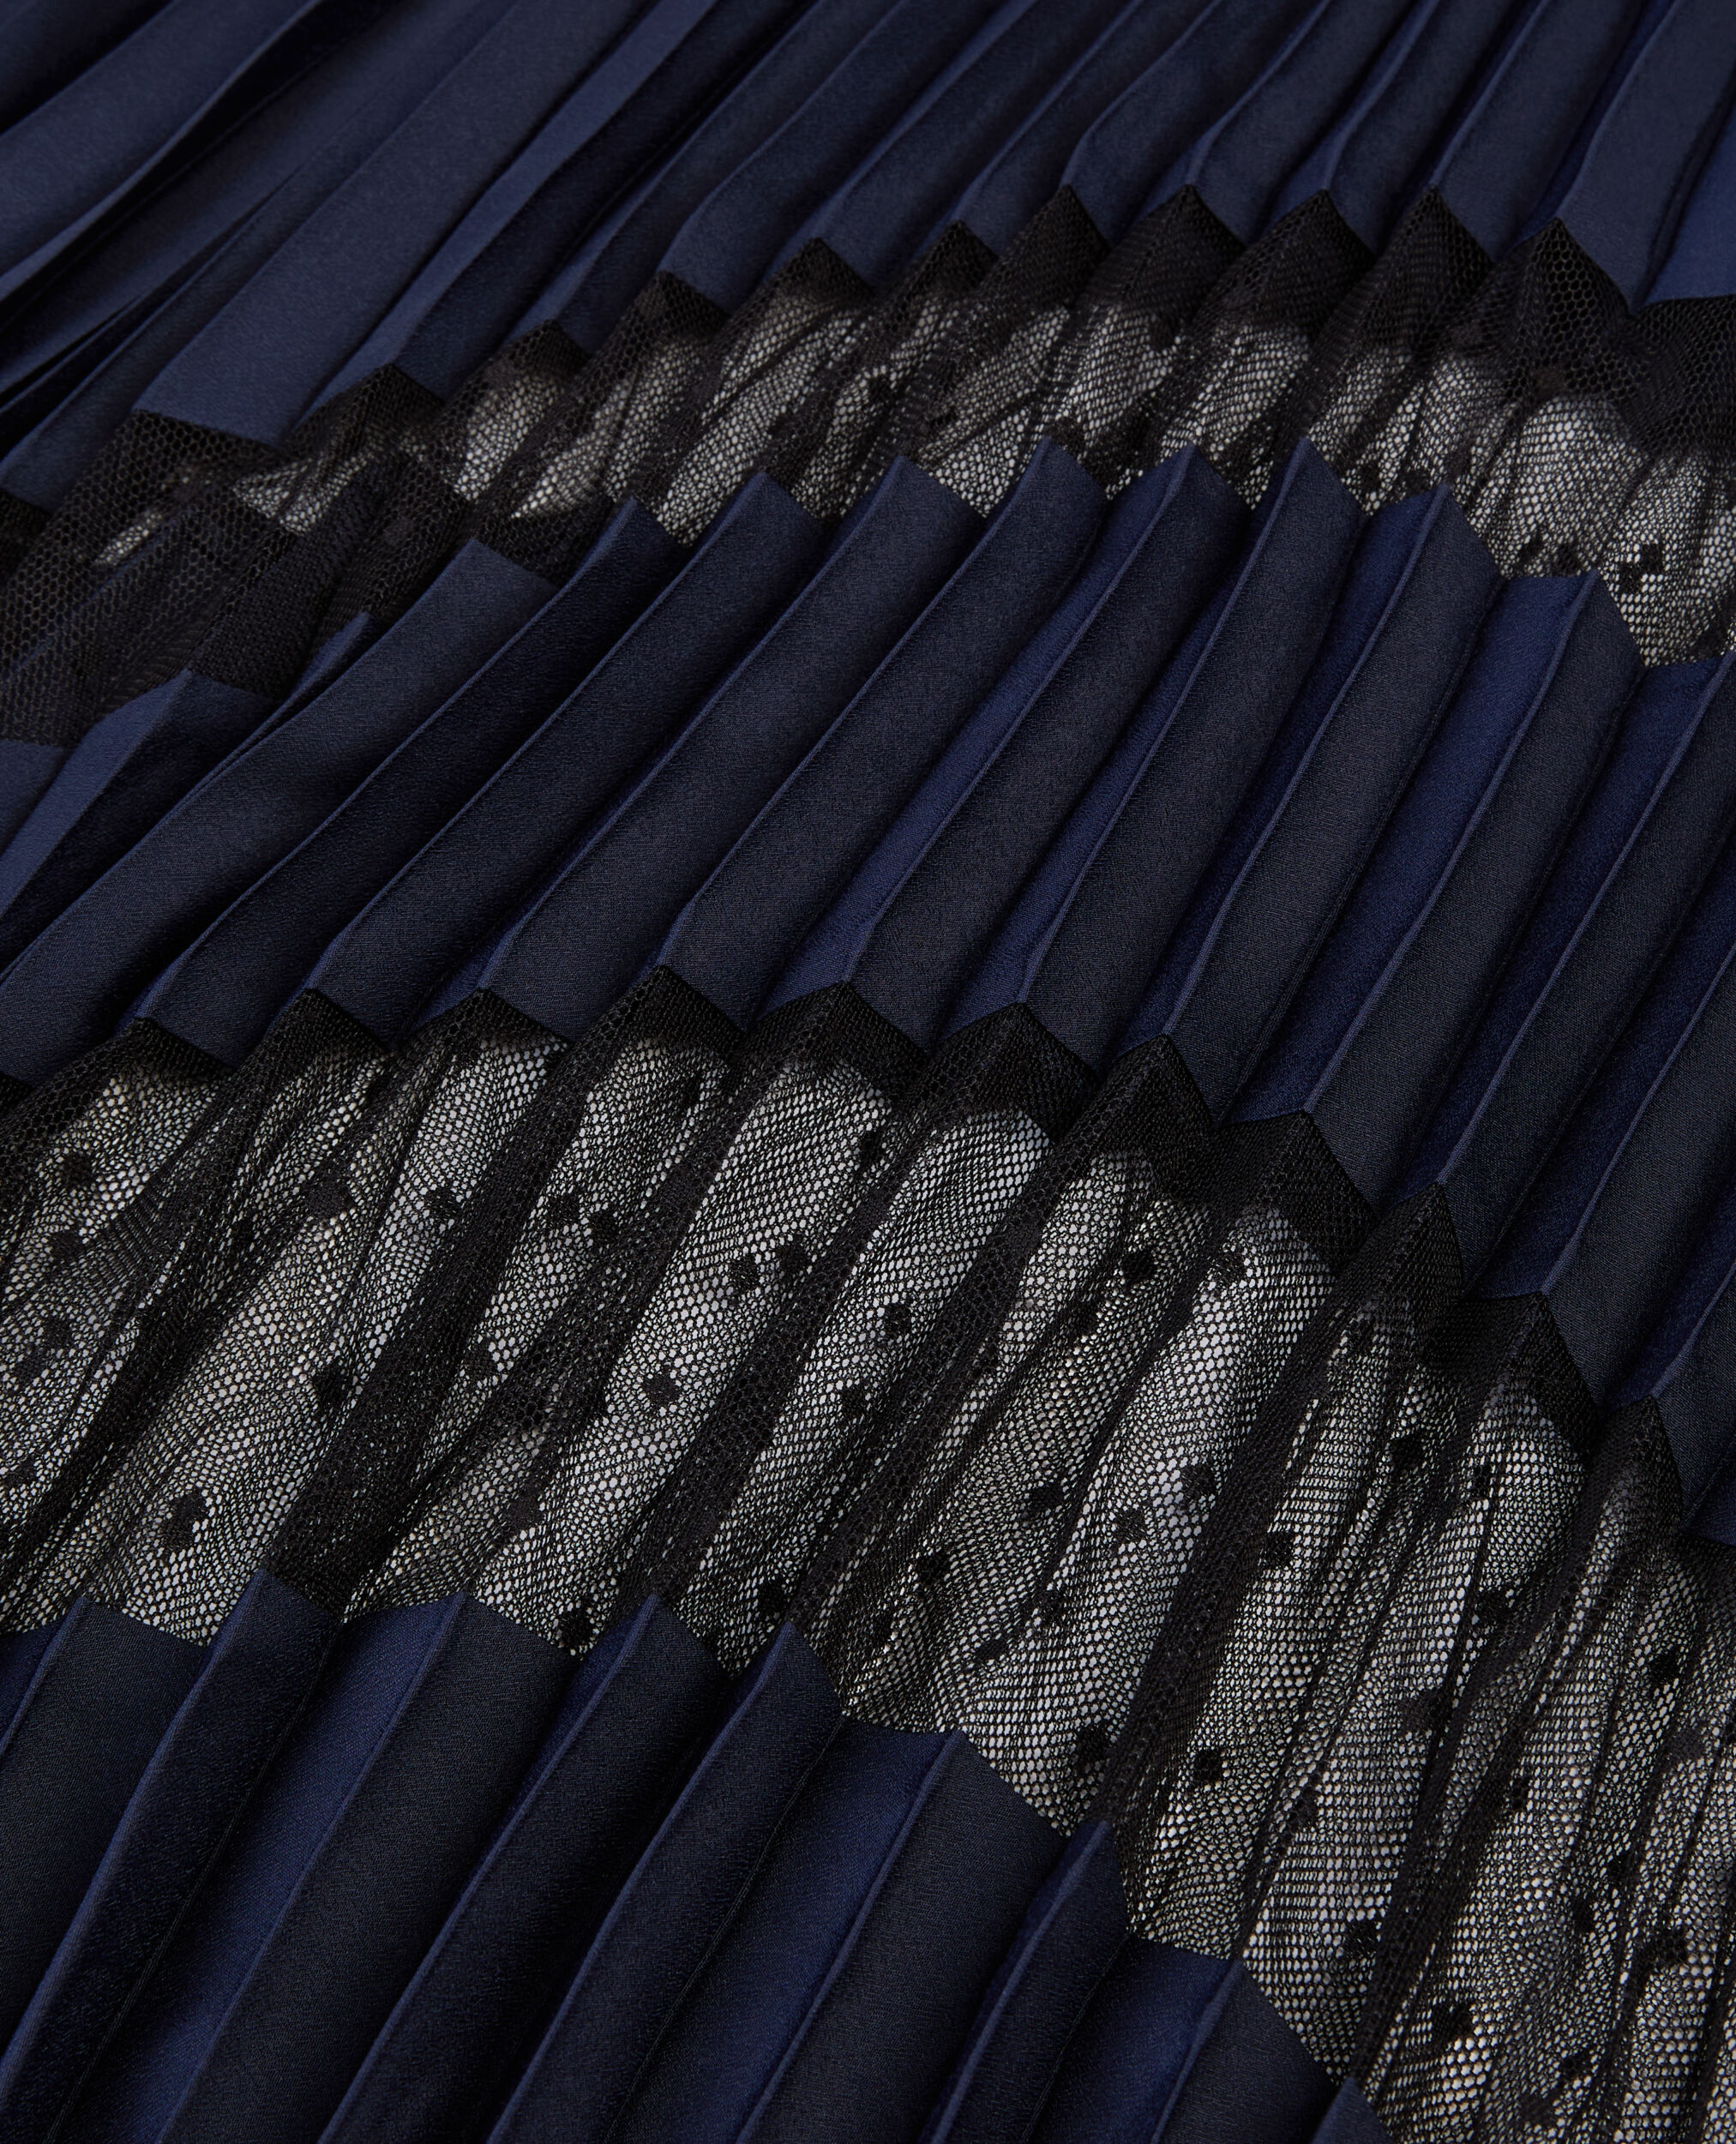 Navy blue long pleated skirt, NAVY, hi-res image number null